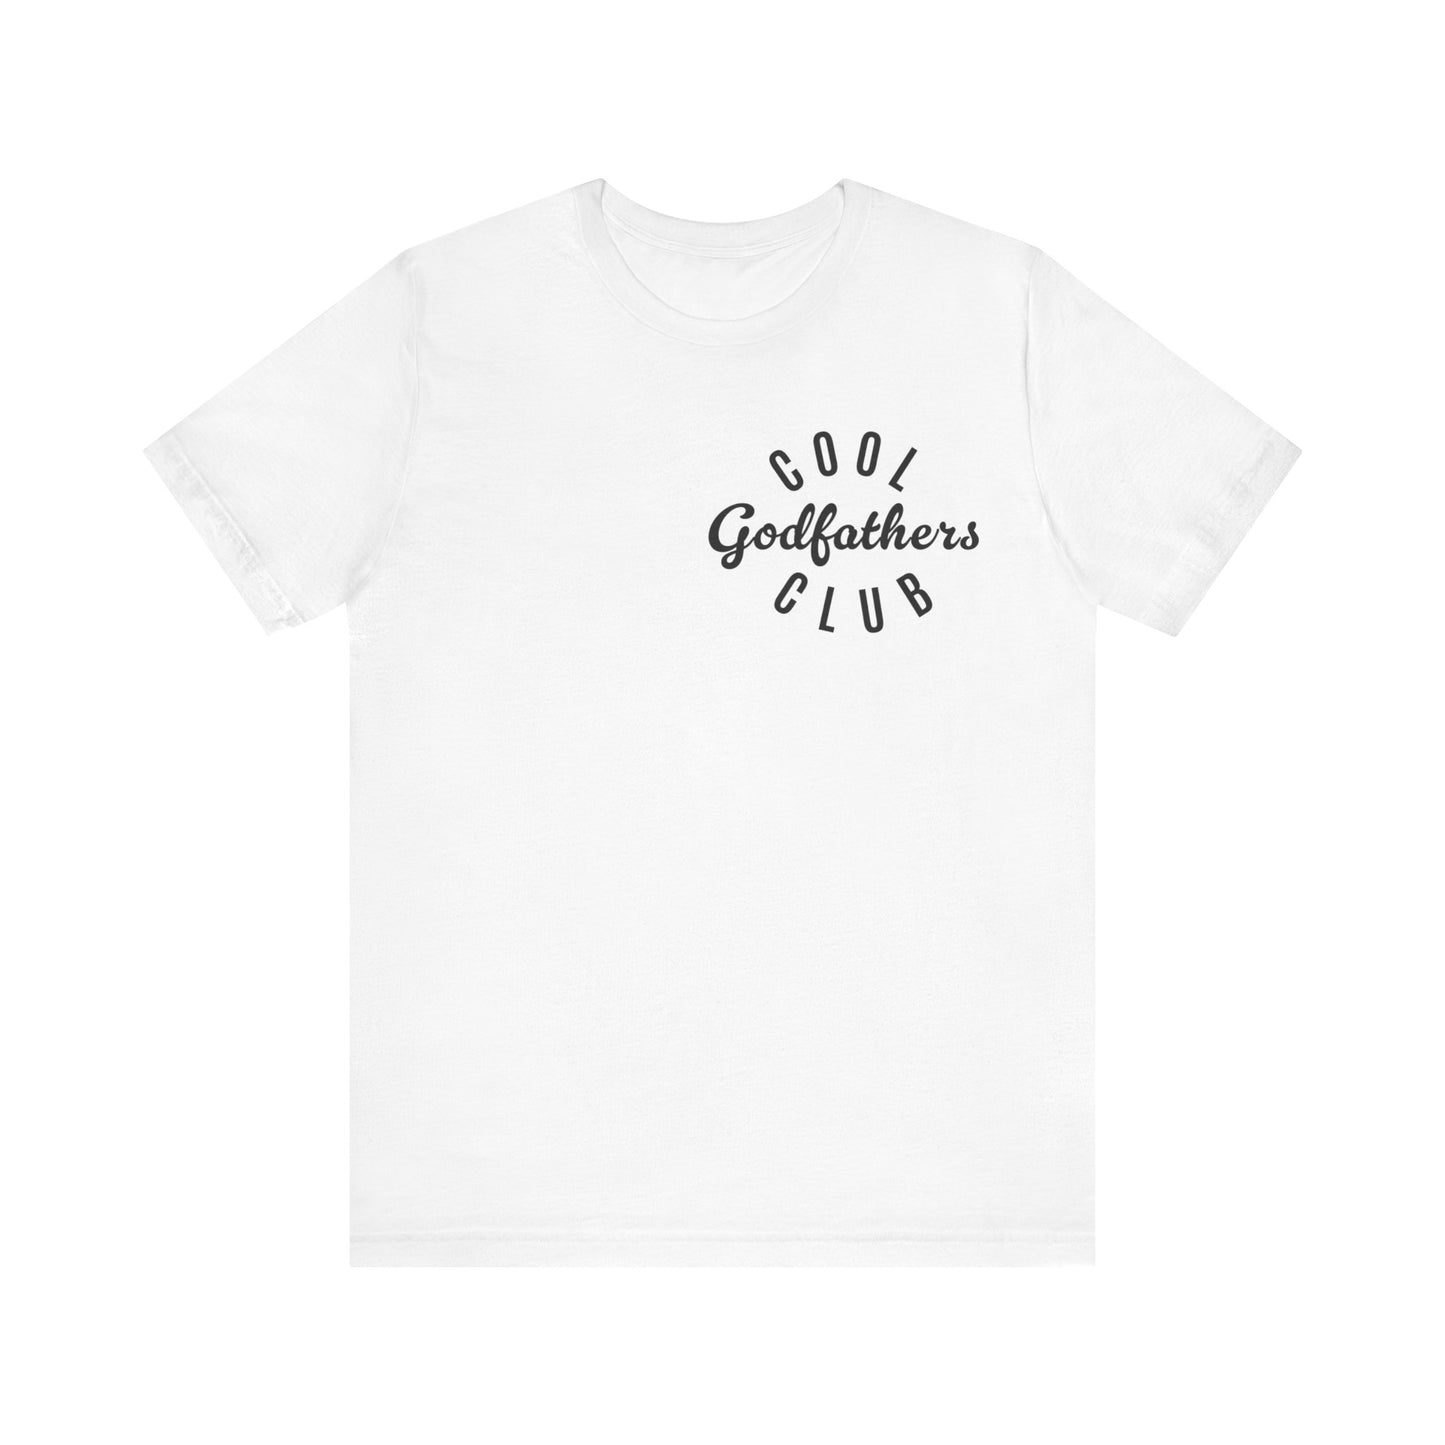 Cool Godfathers Club Shirt, Funny Gift for Godfather to Be, Pregnancy Announcement TShirt for Men, Cool Pop T-Shirt for Godfather, T1126